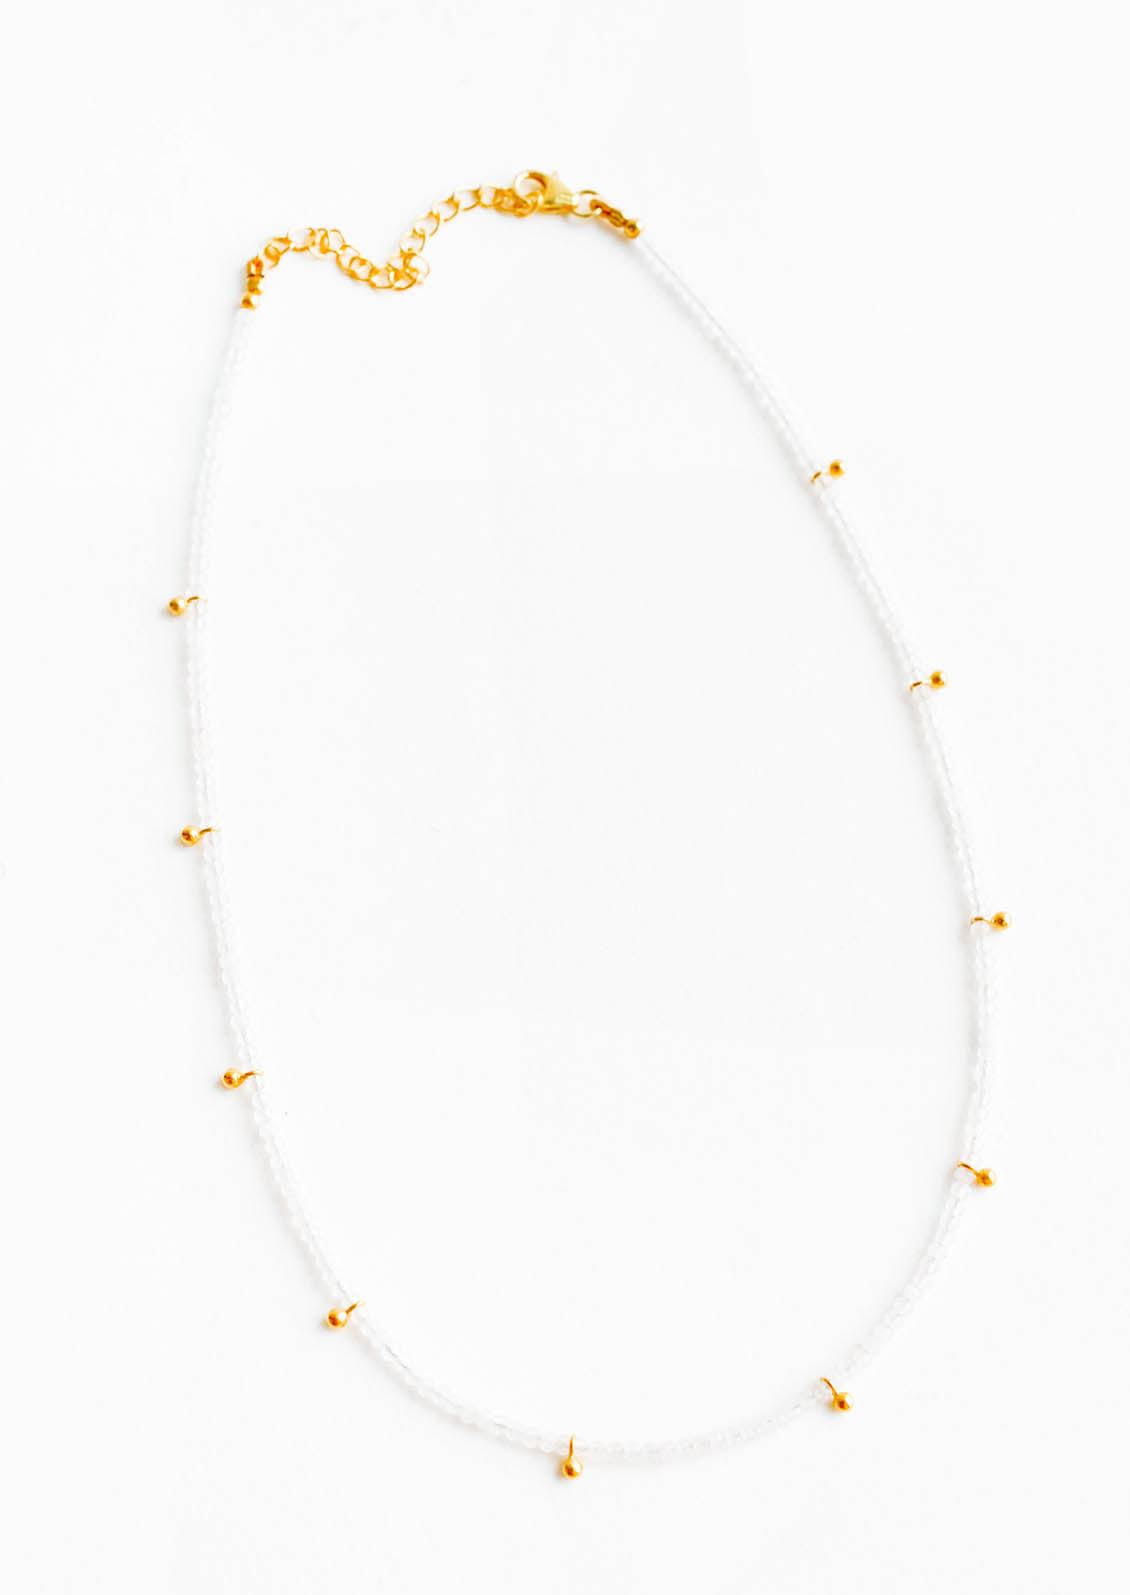 A necklace of clear gray gemstones with evenly spaced gold beads and a golden chain clasp.